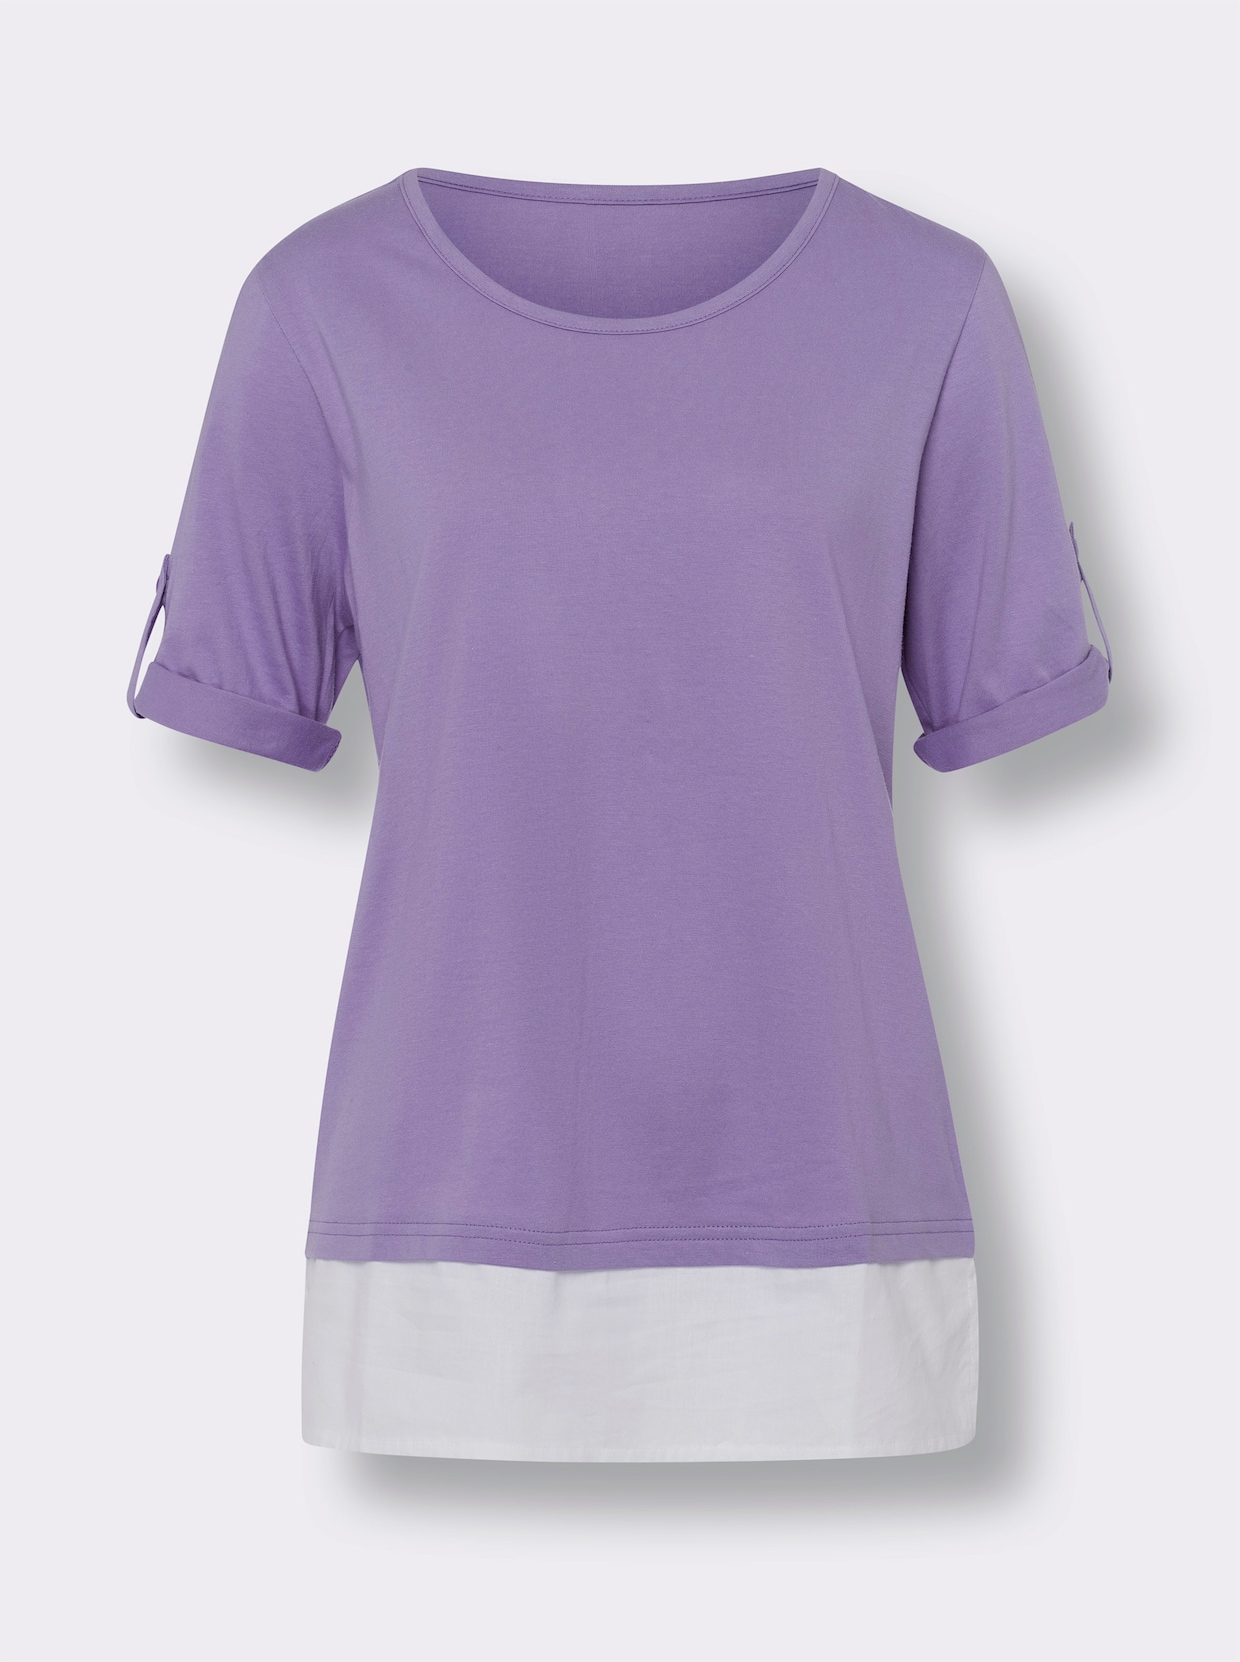 2-in-1-Shirt - lavendel-weiss